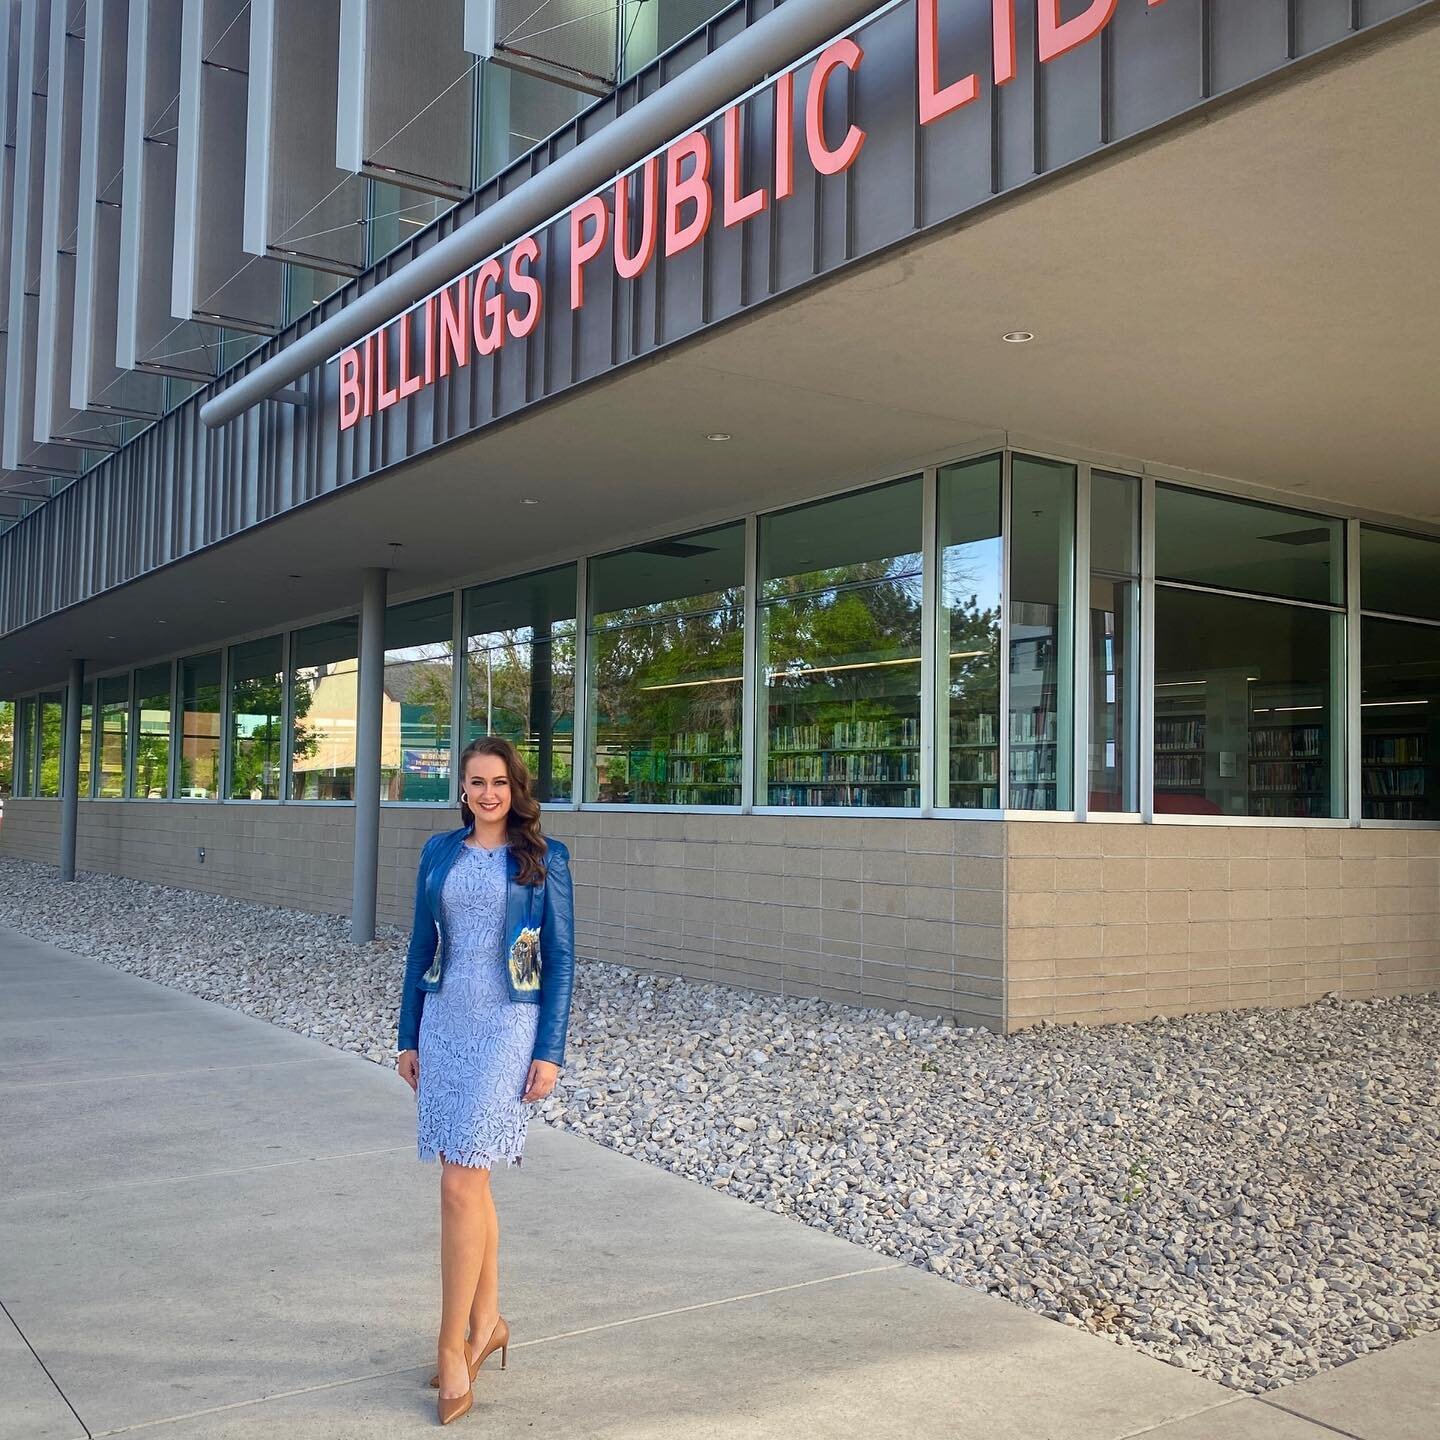 Last night I traded in my cowboy boots for a pair of heels and had so much fun hosting a table at the Billings Library Foundation&rsquo;s Food for Thought fundraising event! I facilitated conversation about public art and had the opportunity to discu